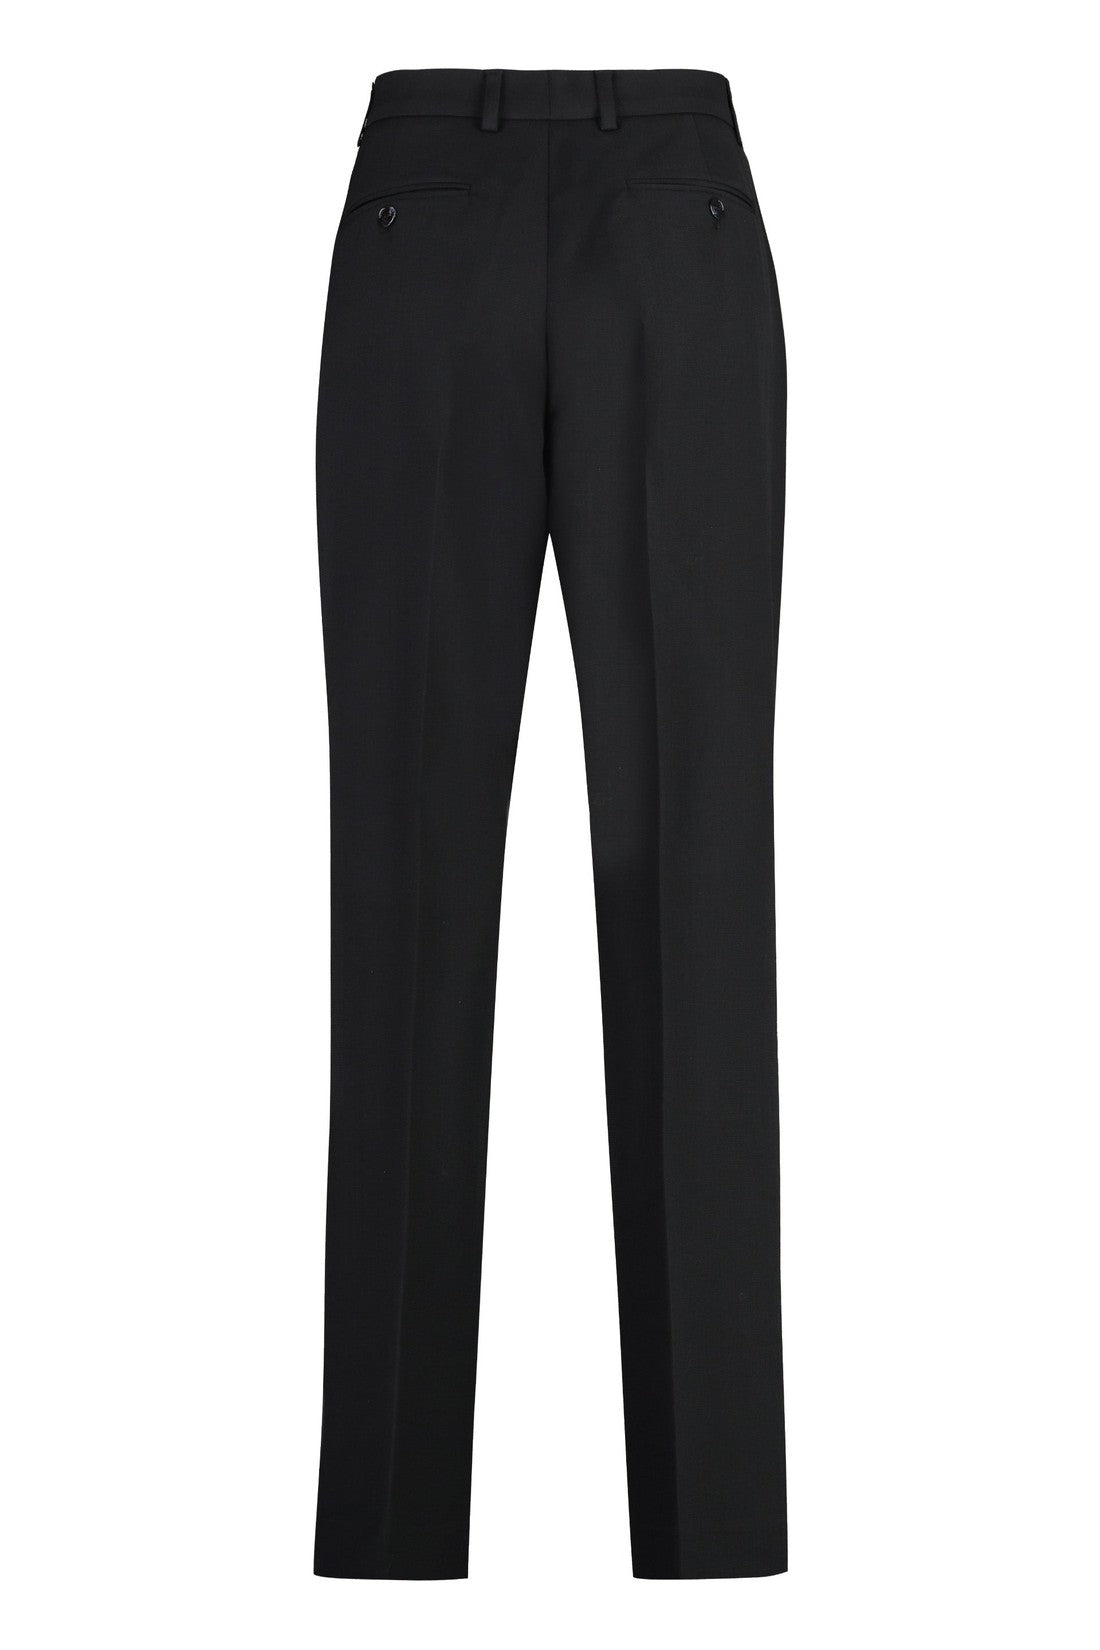 Acne Studios-OUTLET-SALE-Wool blend tailored trousers-ARCHIVIST